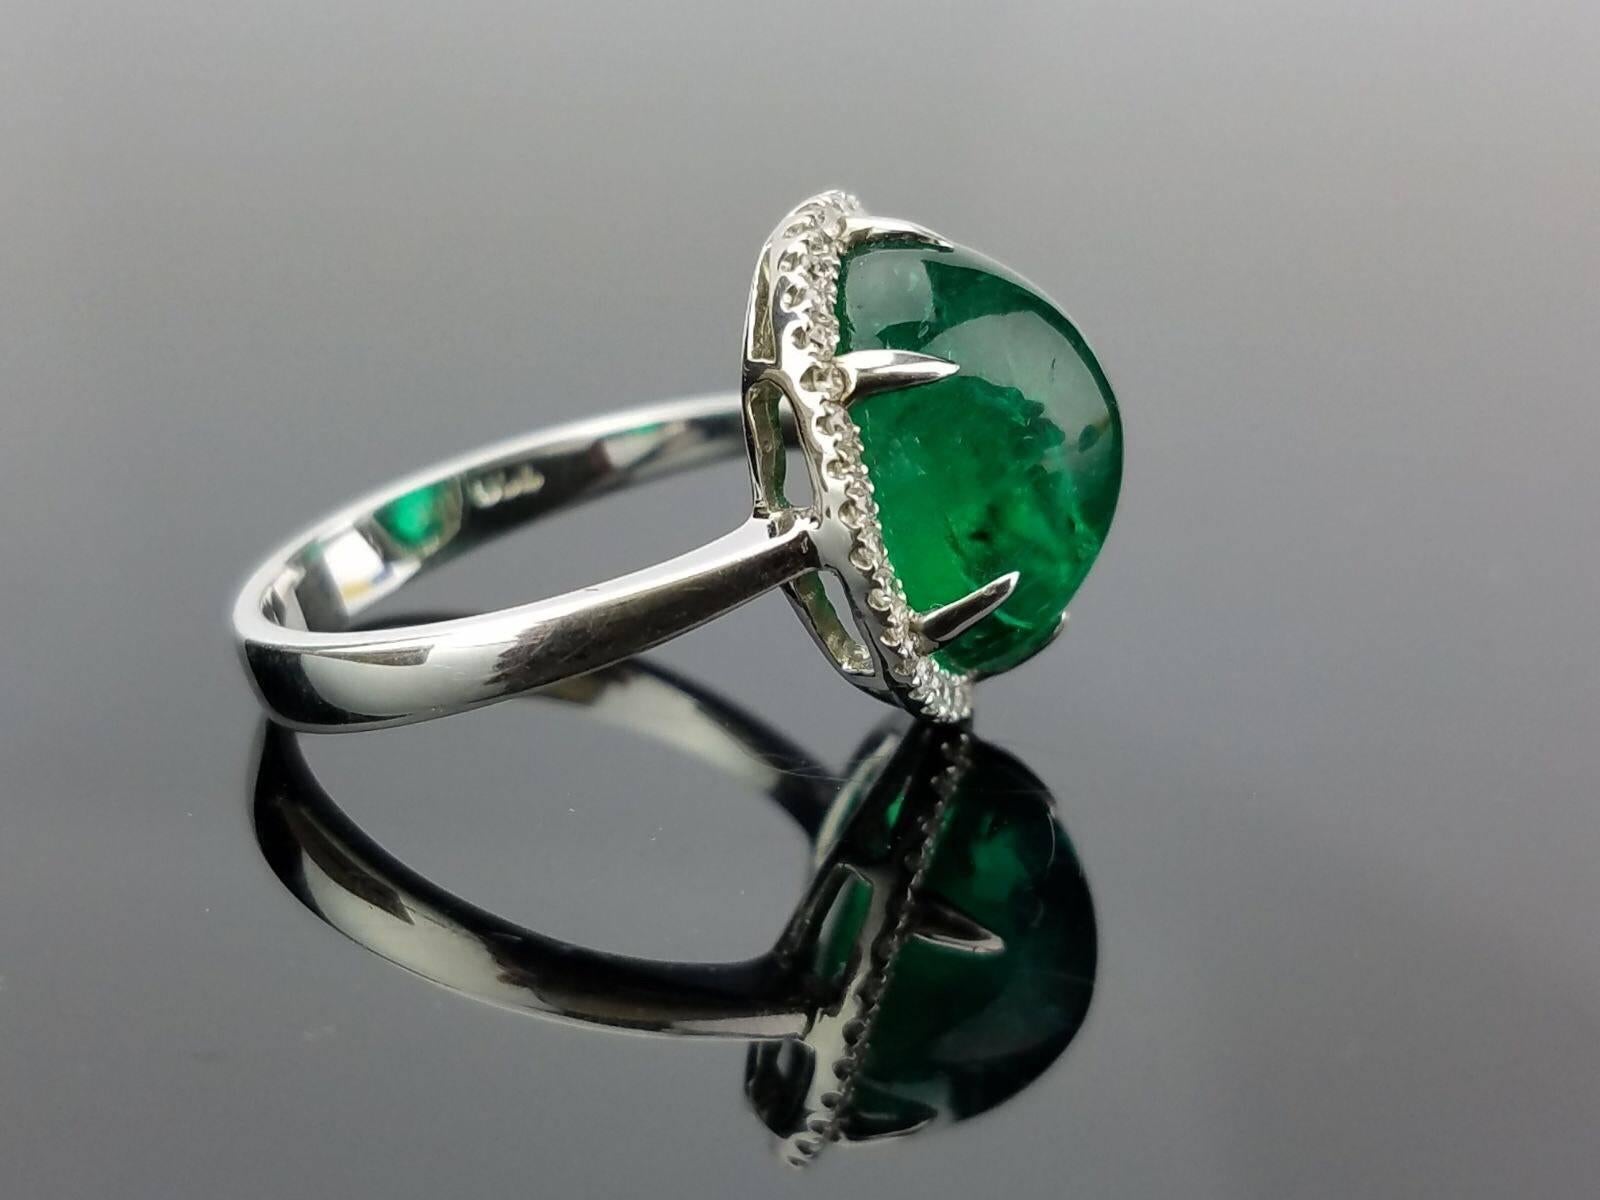 An elegant cocktail ring using a beautiful Emerald Cabochon centre stone surrounded with White Diamond, all set in 18K white gold. 

Stone Details: 
Stone: Emerald
Carat Weight: 7.46 carats

Diamond Details: 
Total Carat Weight: 0.32 carat
Quality: